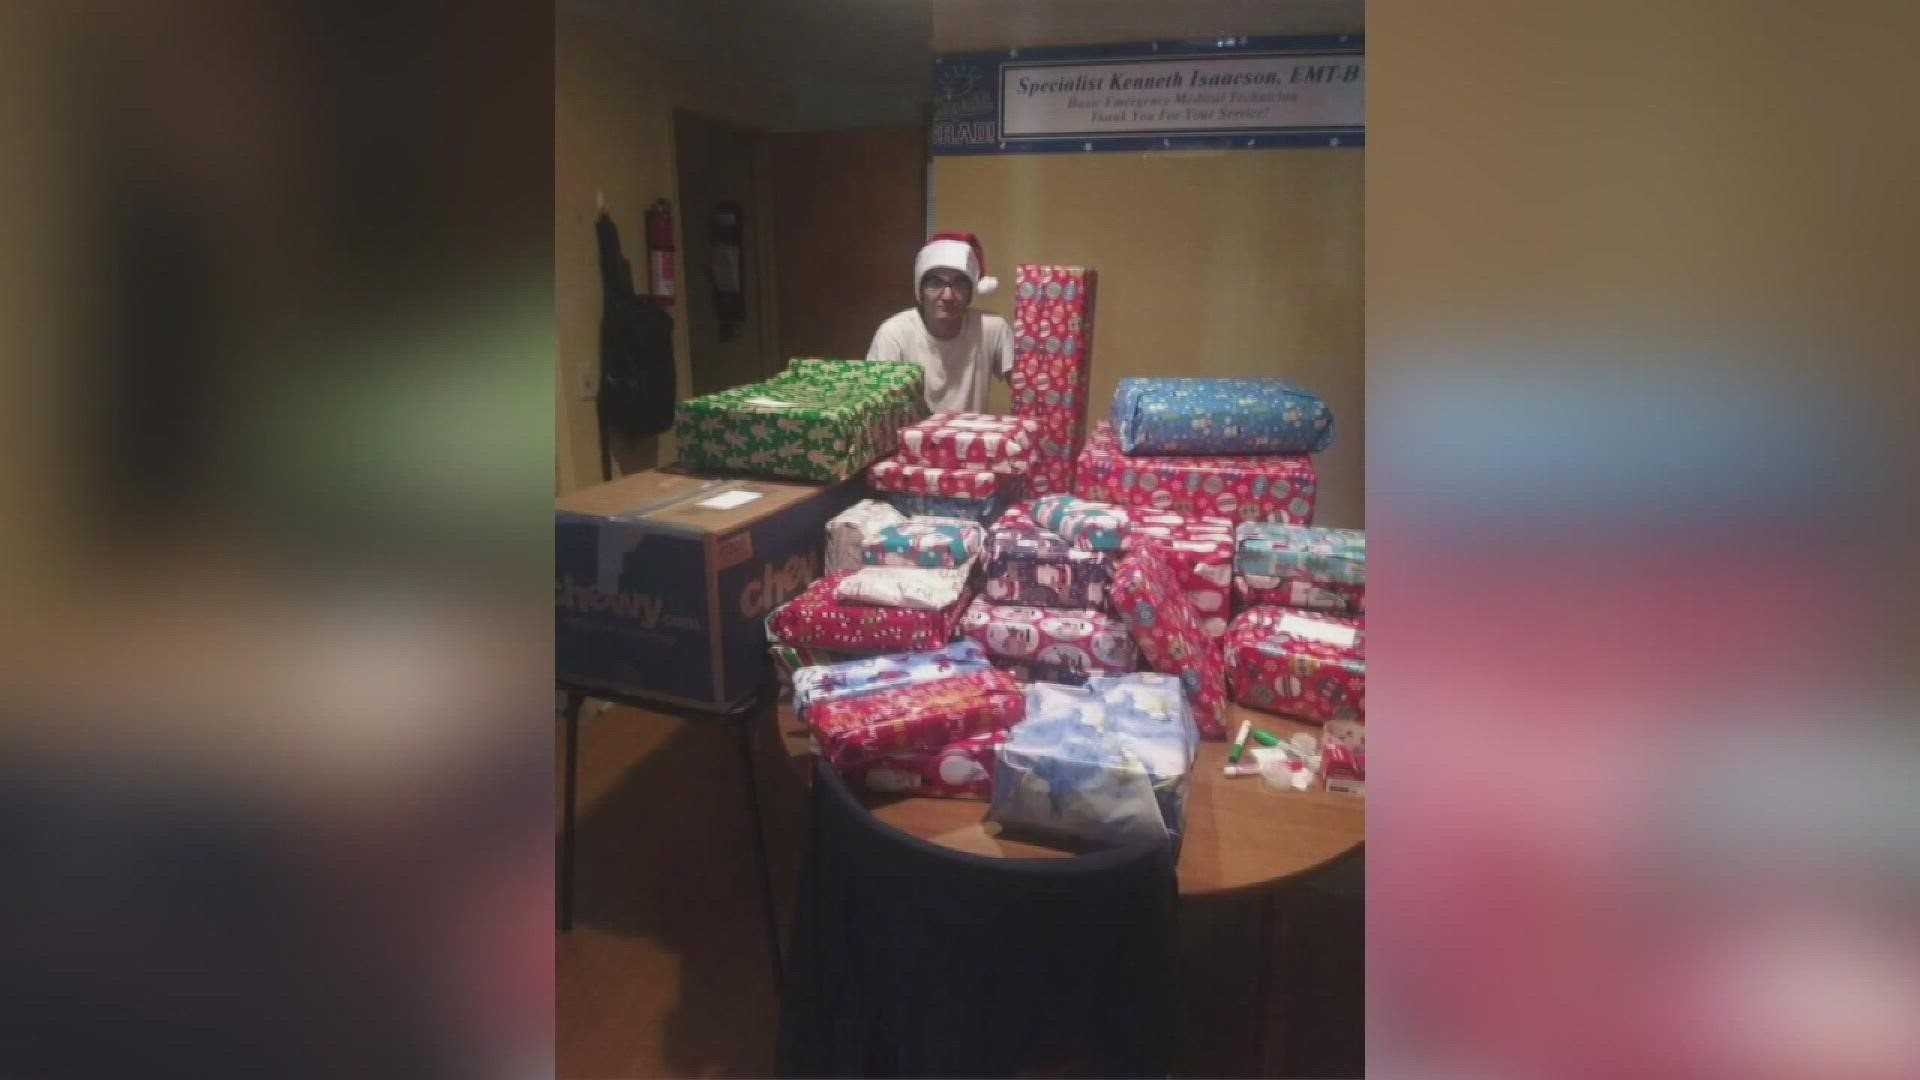 Kenneth Isaacson, a Kalamazoo man, wants to bring the spirit of Christmas to children living in homeless shelters.